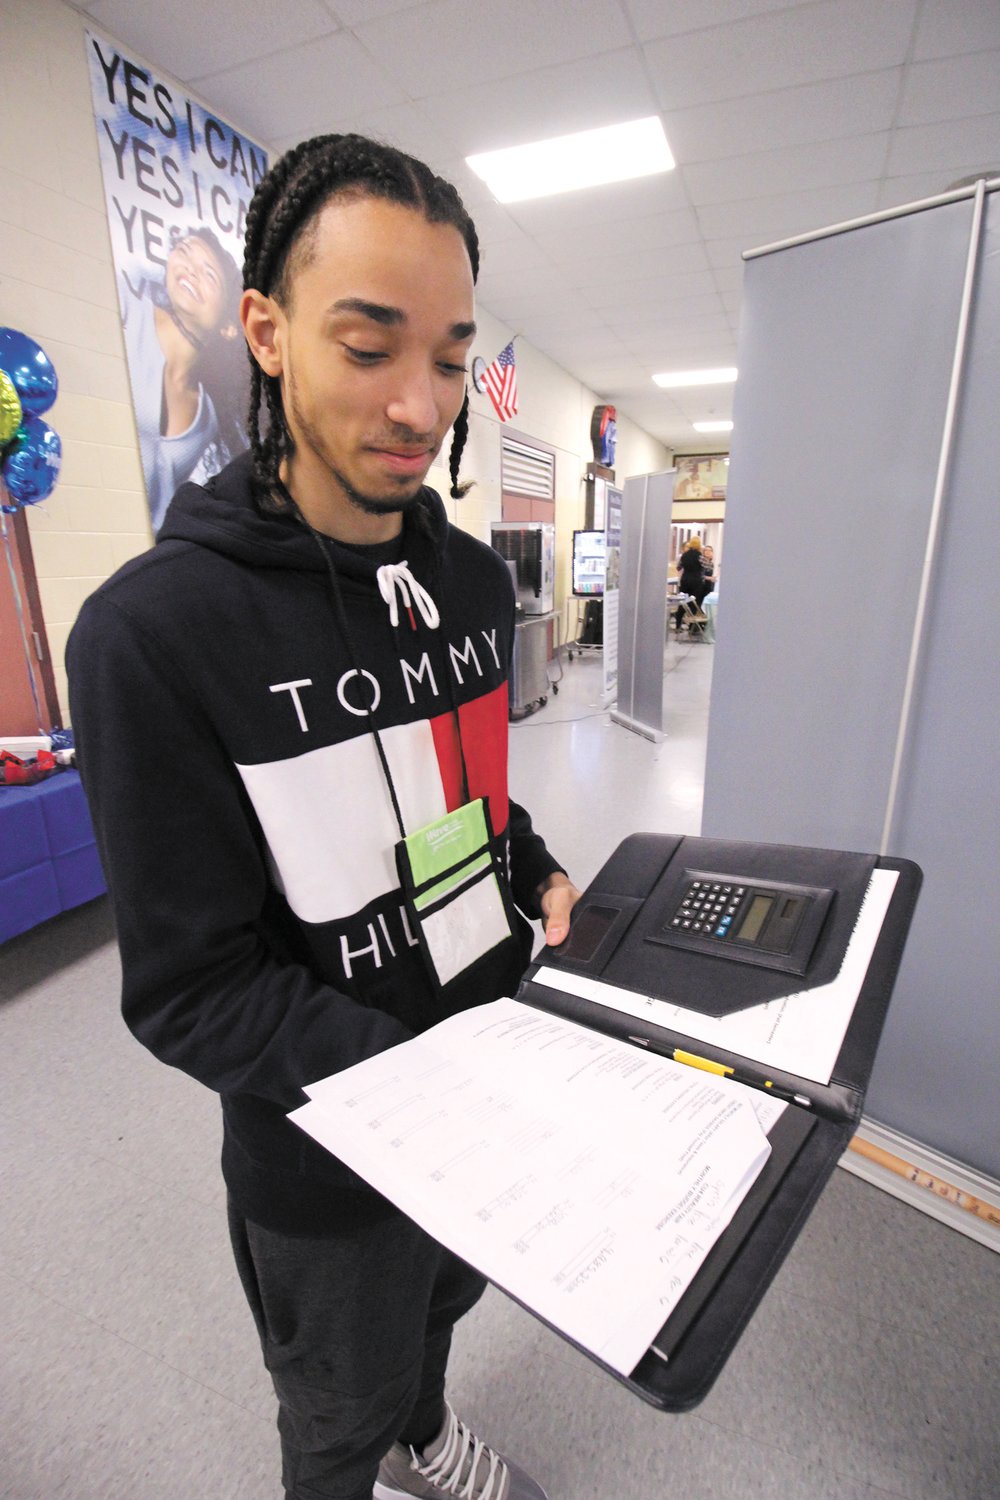 NOW THAT’S A LOT:  Syriis Price who has his career goal set on becoming a home care nurse was stunned to add up what he could expect to spend monthly on food. The total was $311.